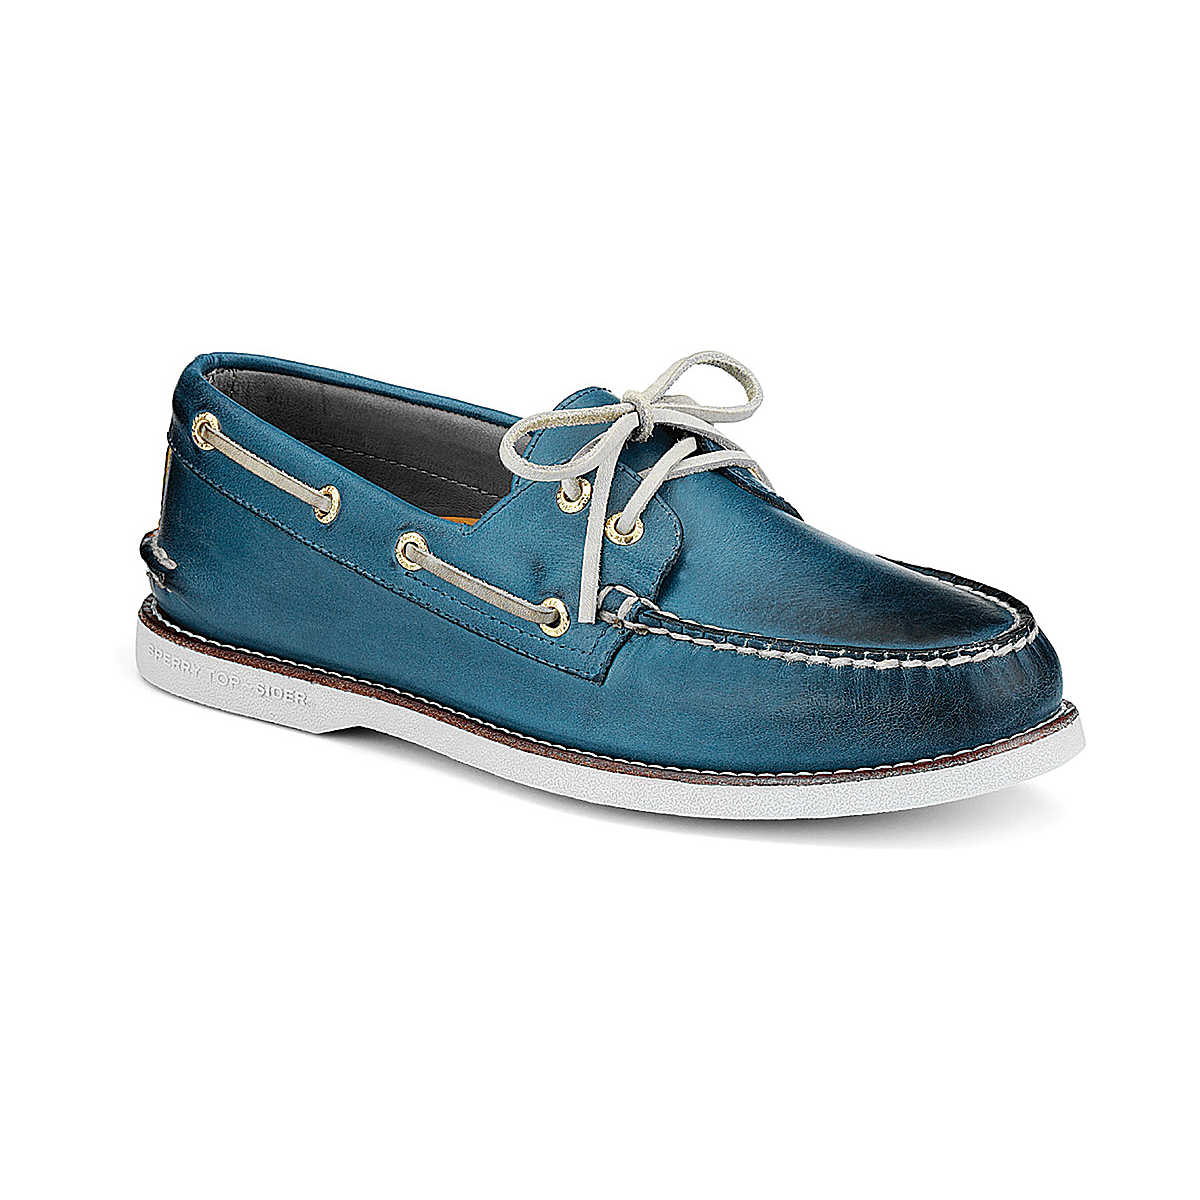 Gold Cup Authentic Original Burnished Leather 2-Eye Boat Shoe, Blue Burnished Leather, dynamic 1